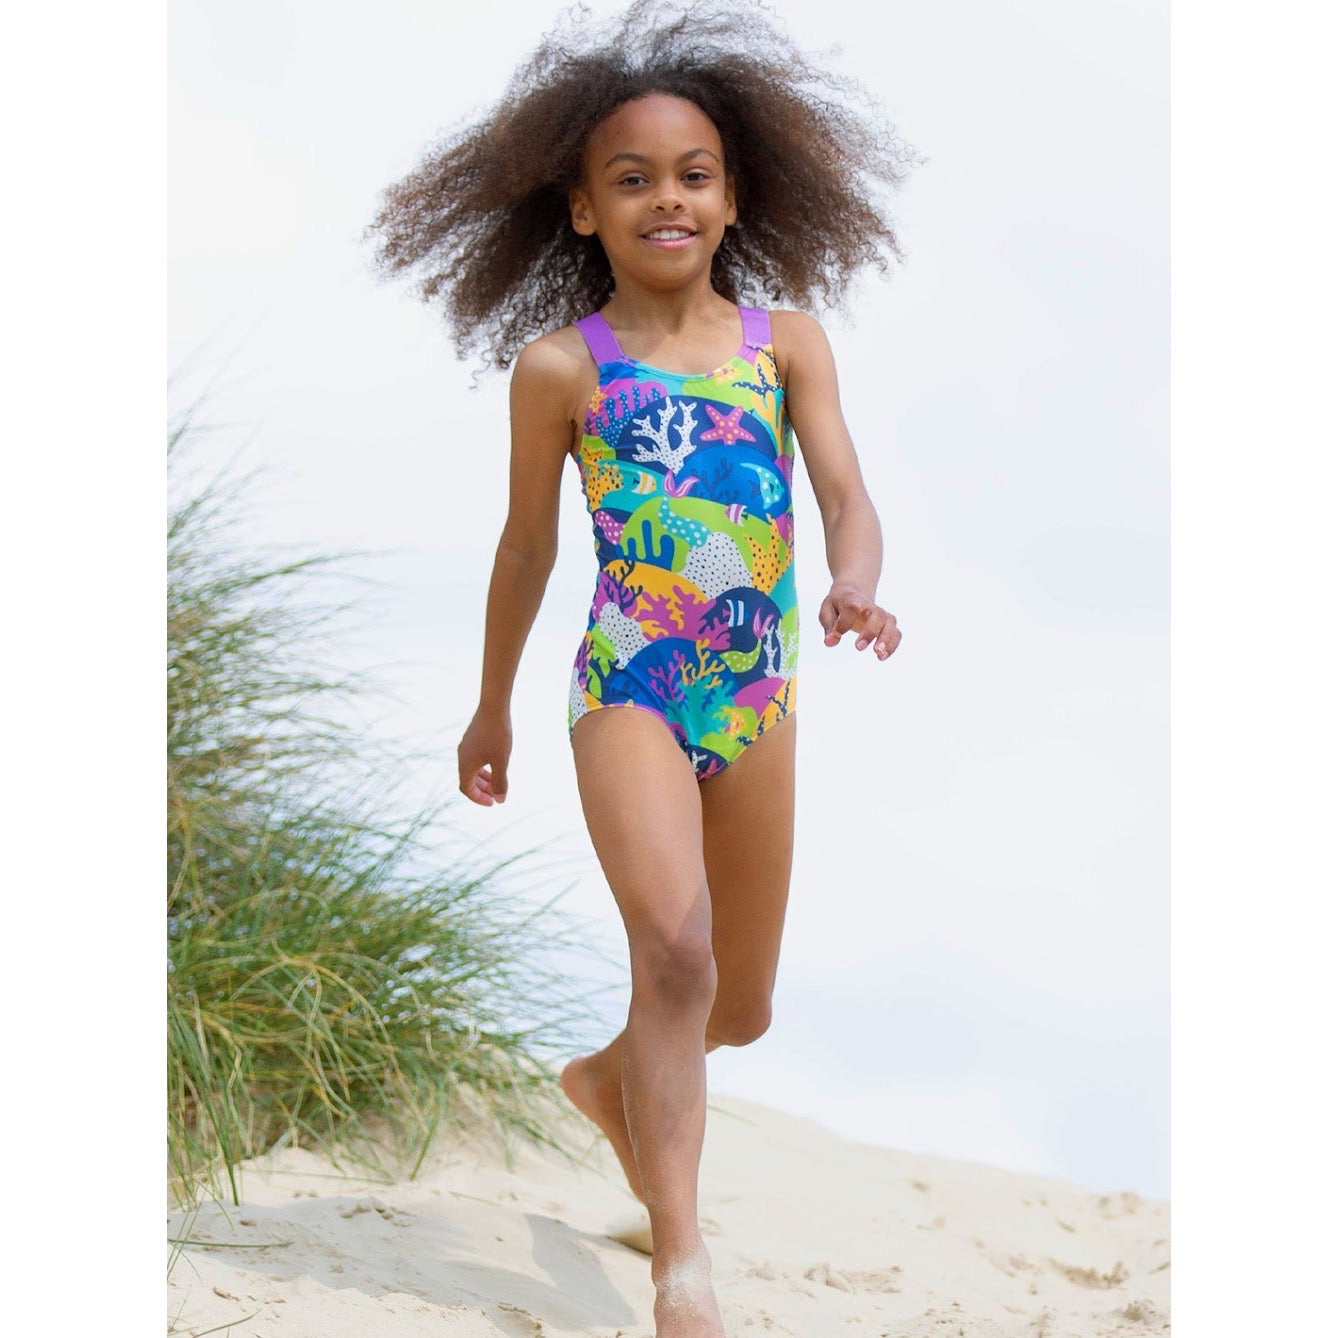 Kite Coral Reef Swimsuit T125 Clothing 4YRS / Multi,5YRS / Multi,6YRS / Multi,7YRS / Multi,8YRS / Multi